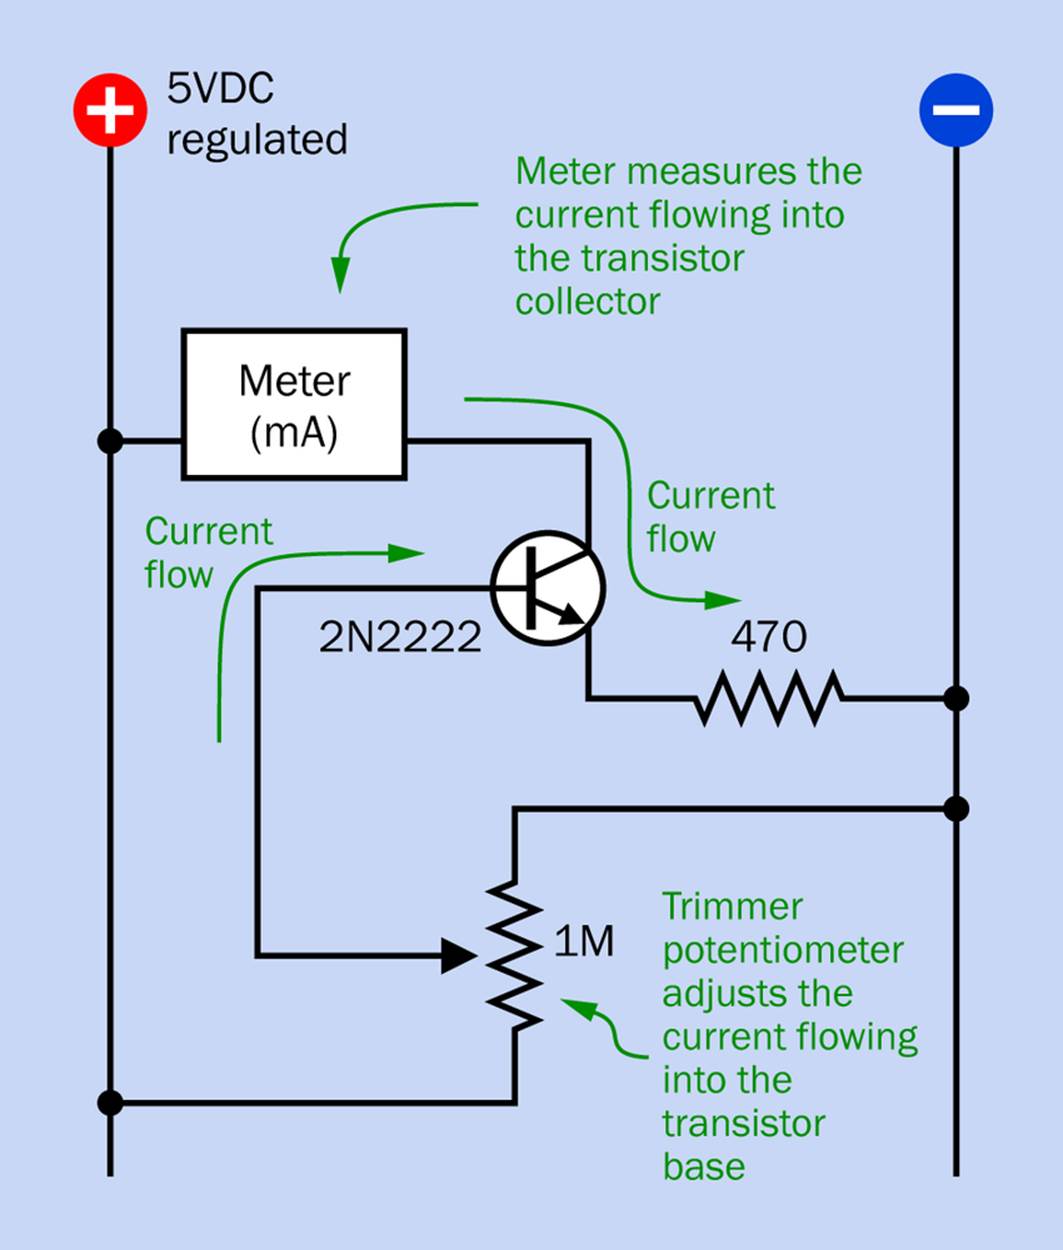 The meter now measures current flowing into the collector of the transistor.